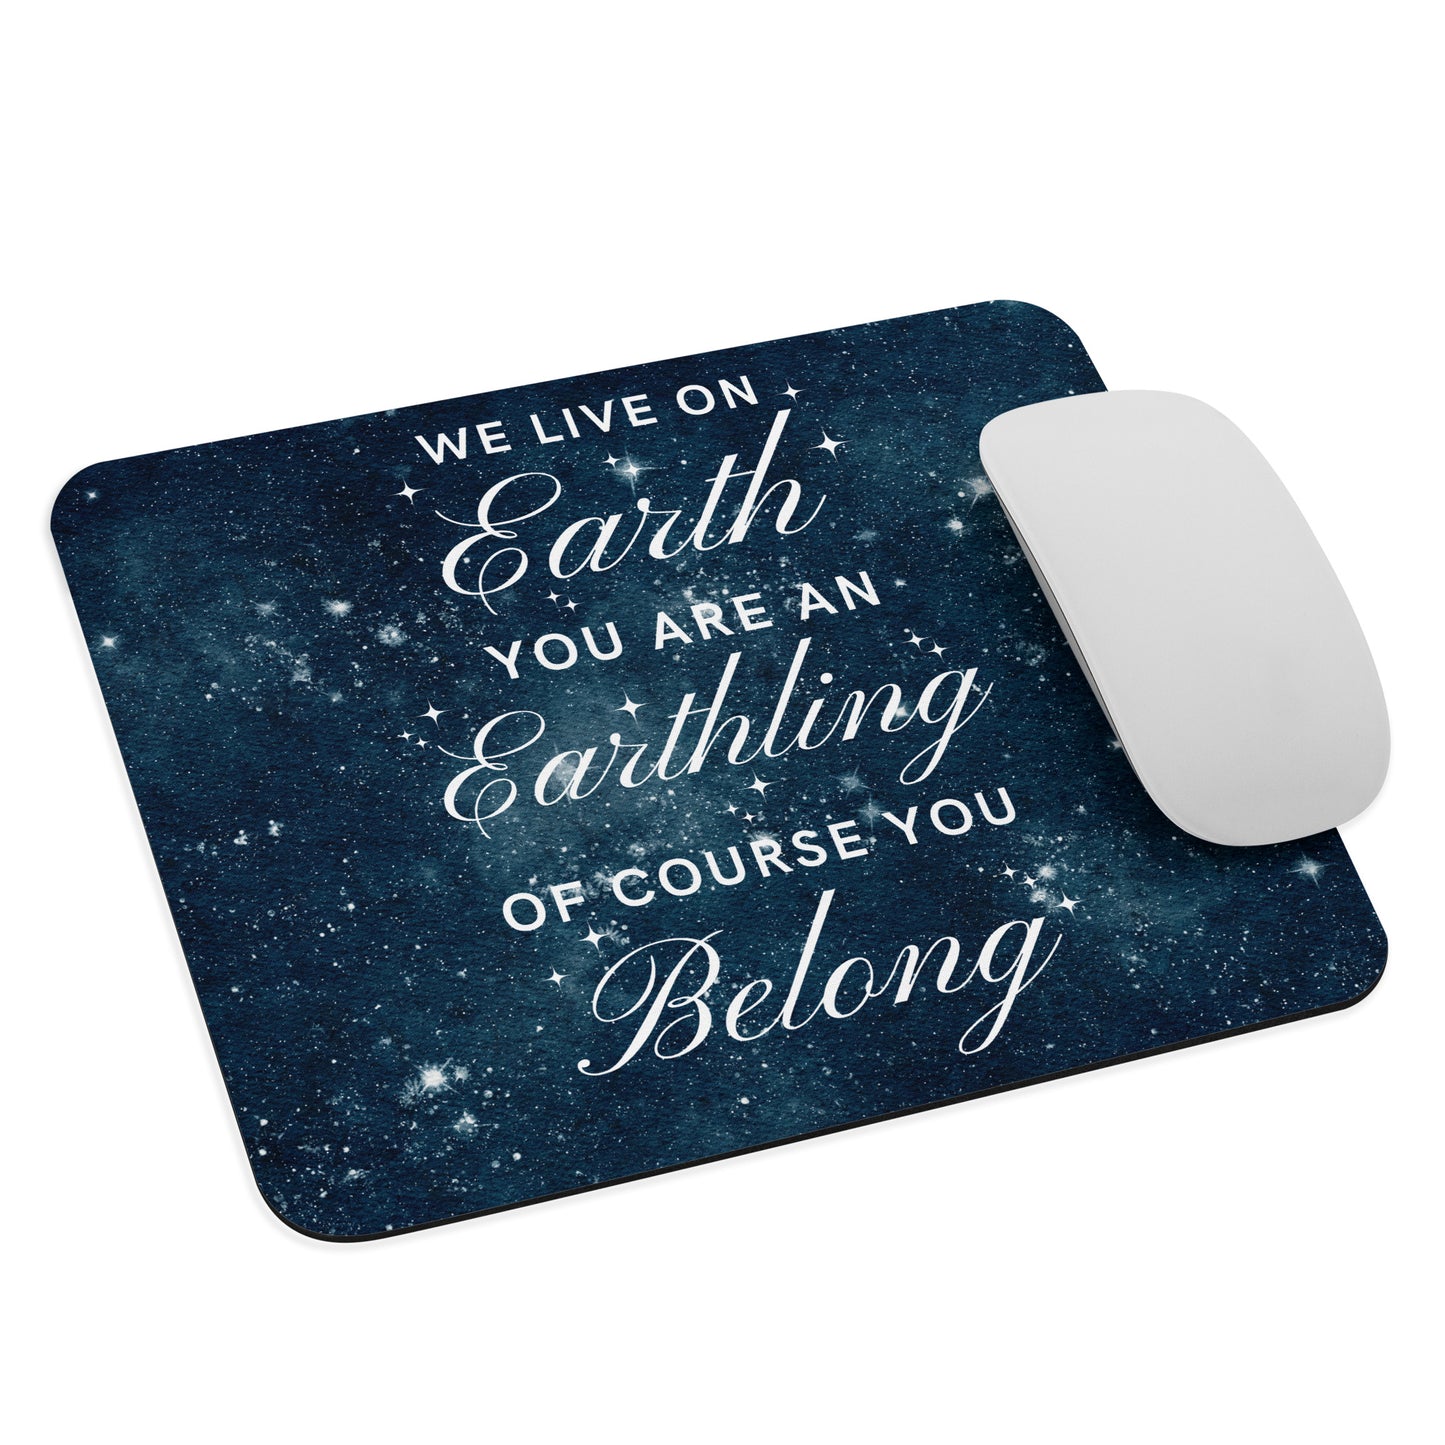 Earthling (You Belong) Inclusive Kindness Mouse Pad